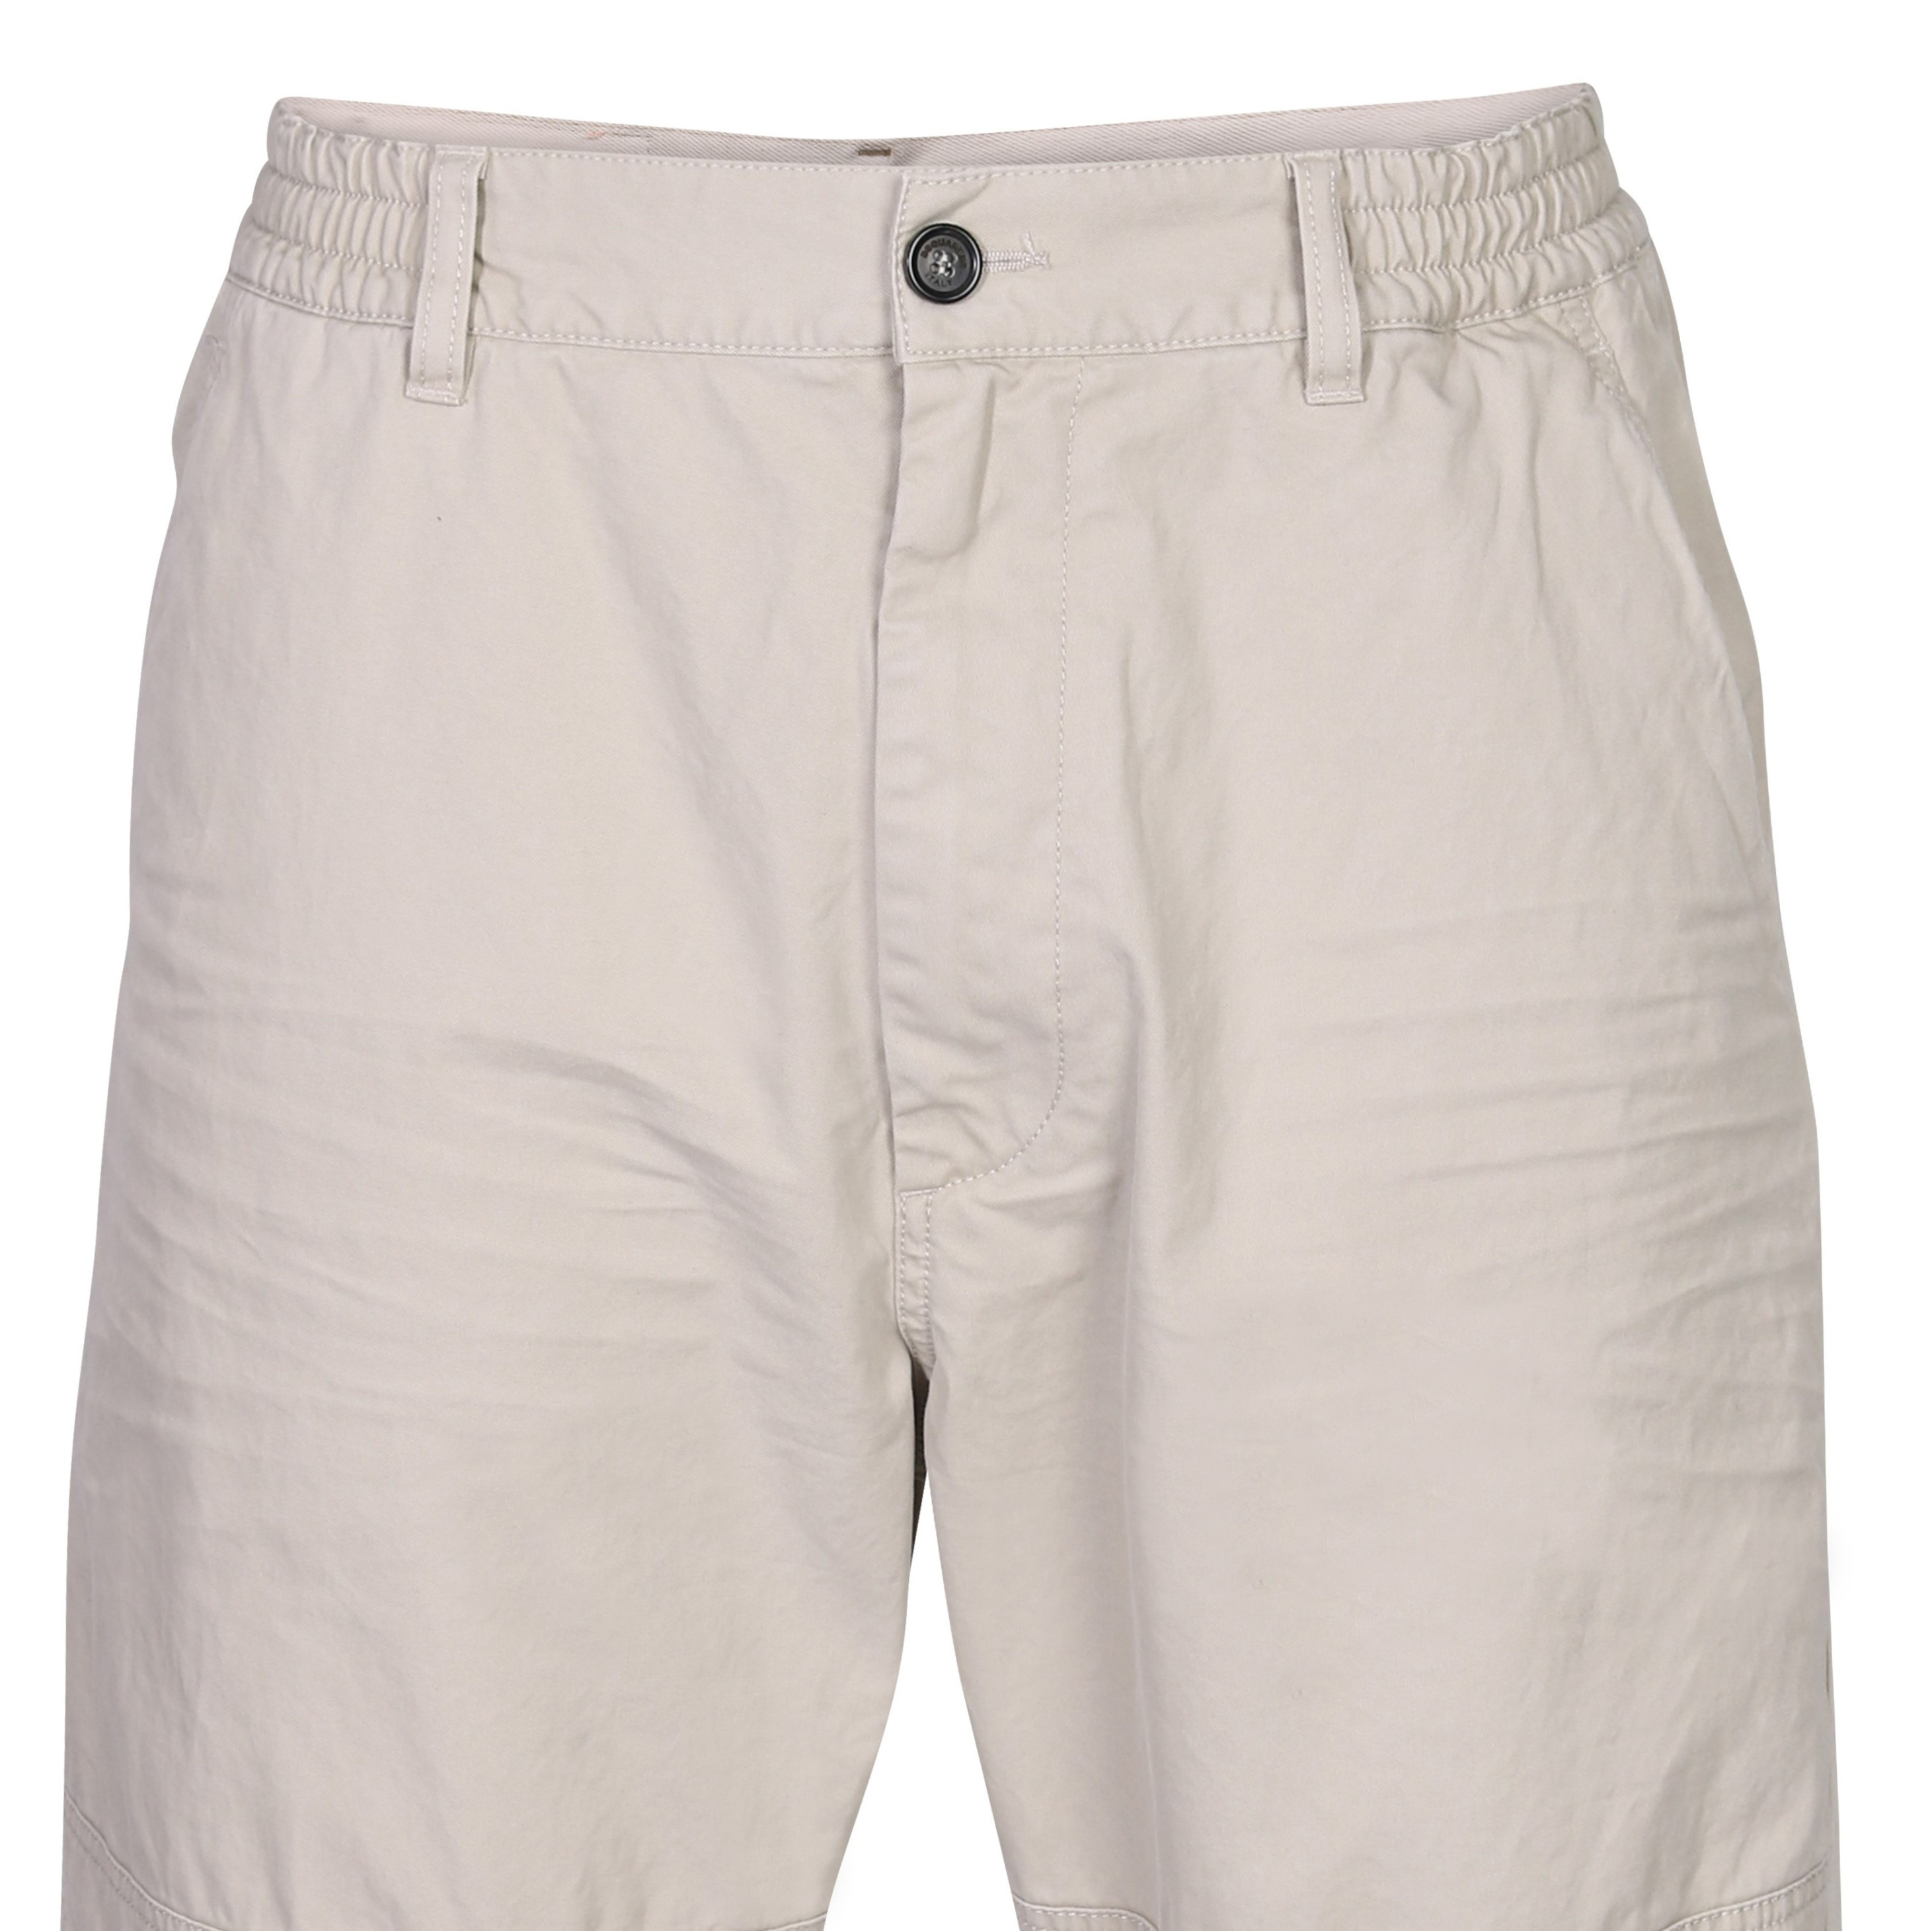 Dsquared Pully Pant in Sand 46